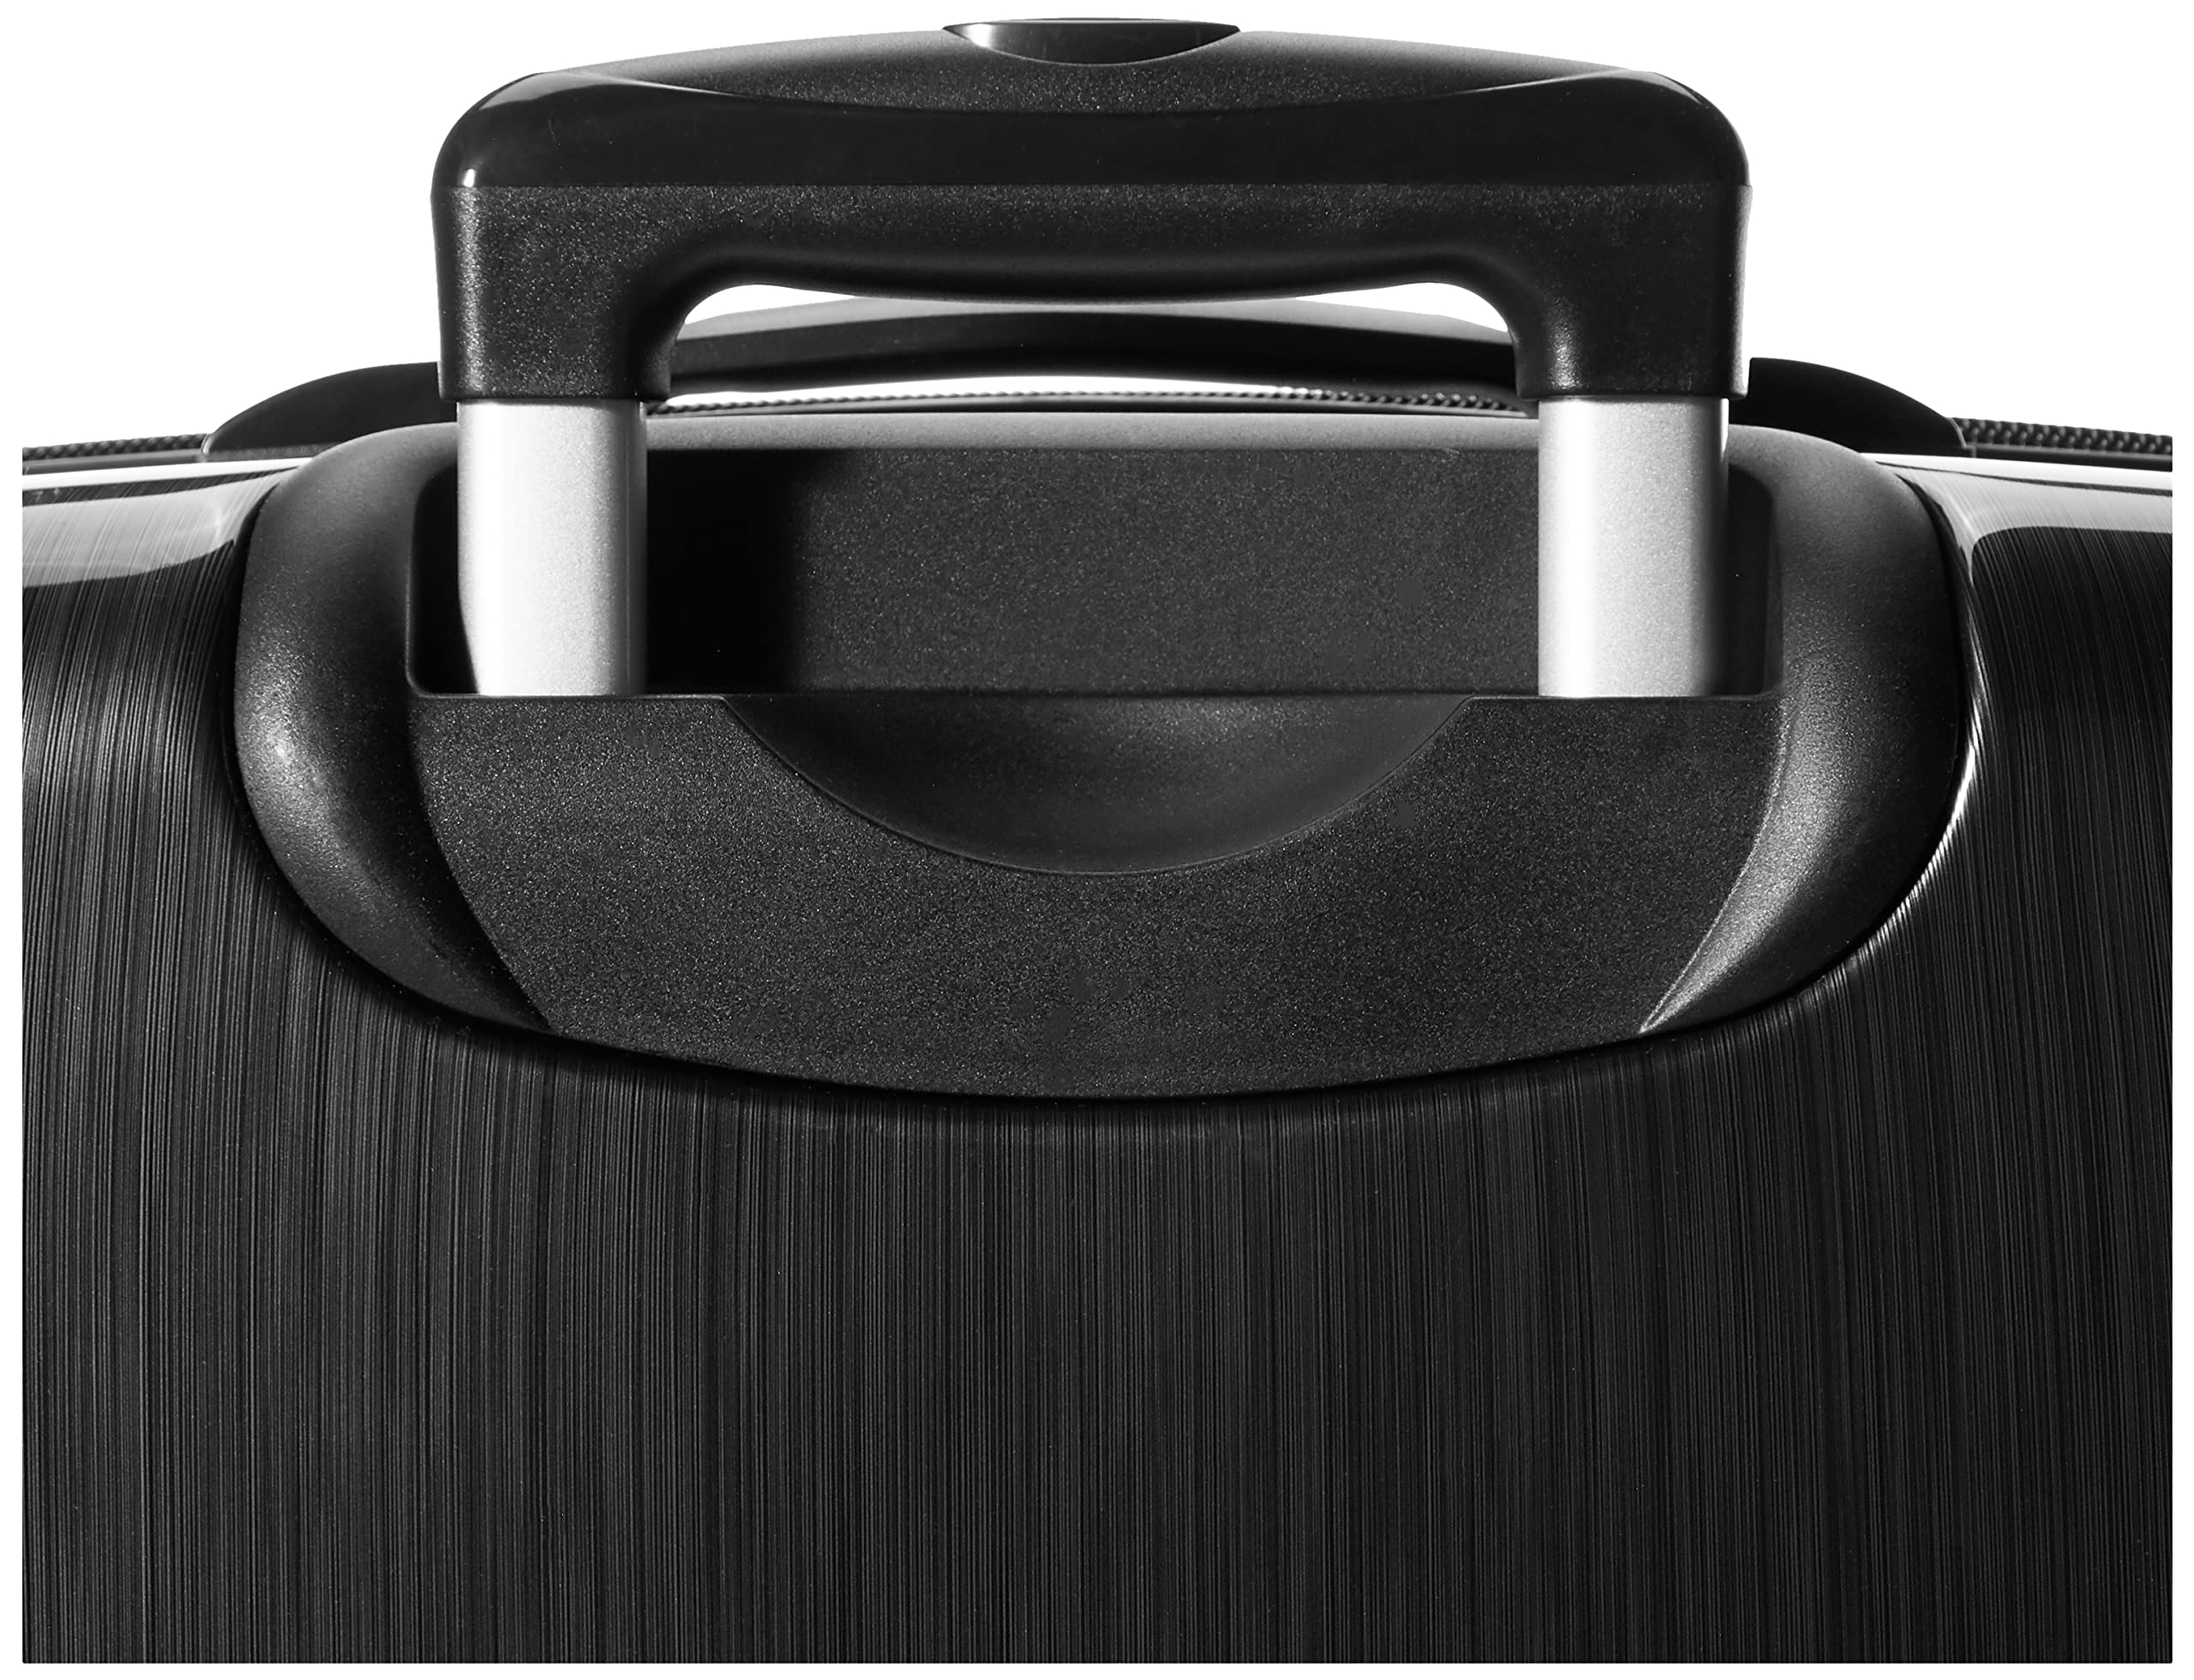 Samsonite Winfield 2 Hardside Expandable Luggage with Spinner Wheels, Checked-Large 28-Inch, Brushed Anthracite